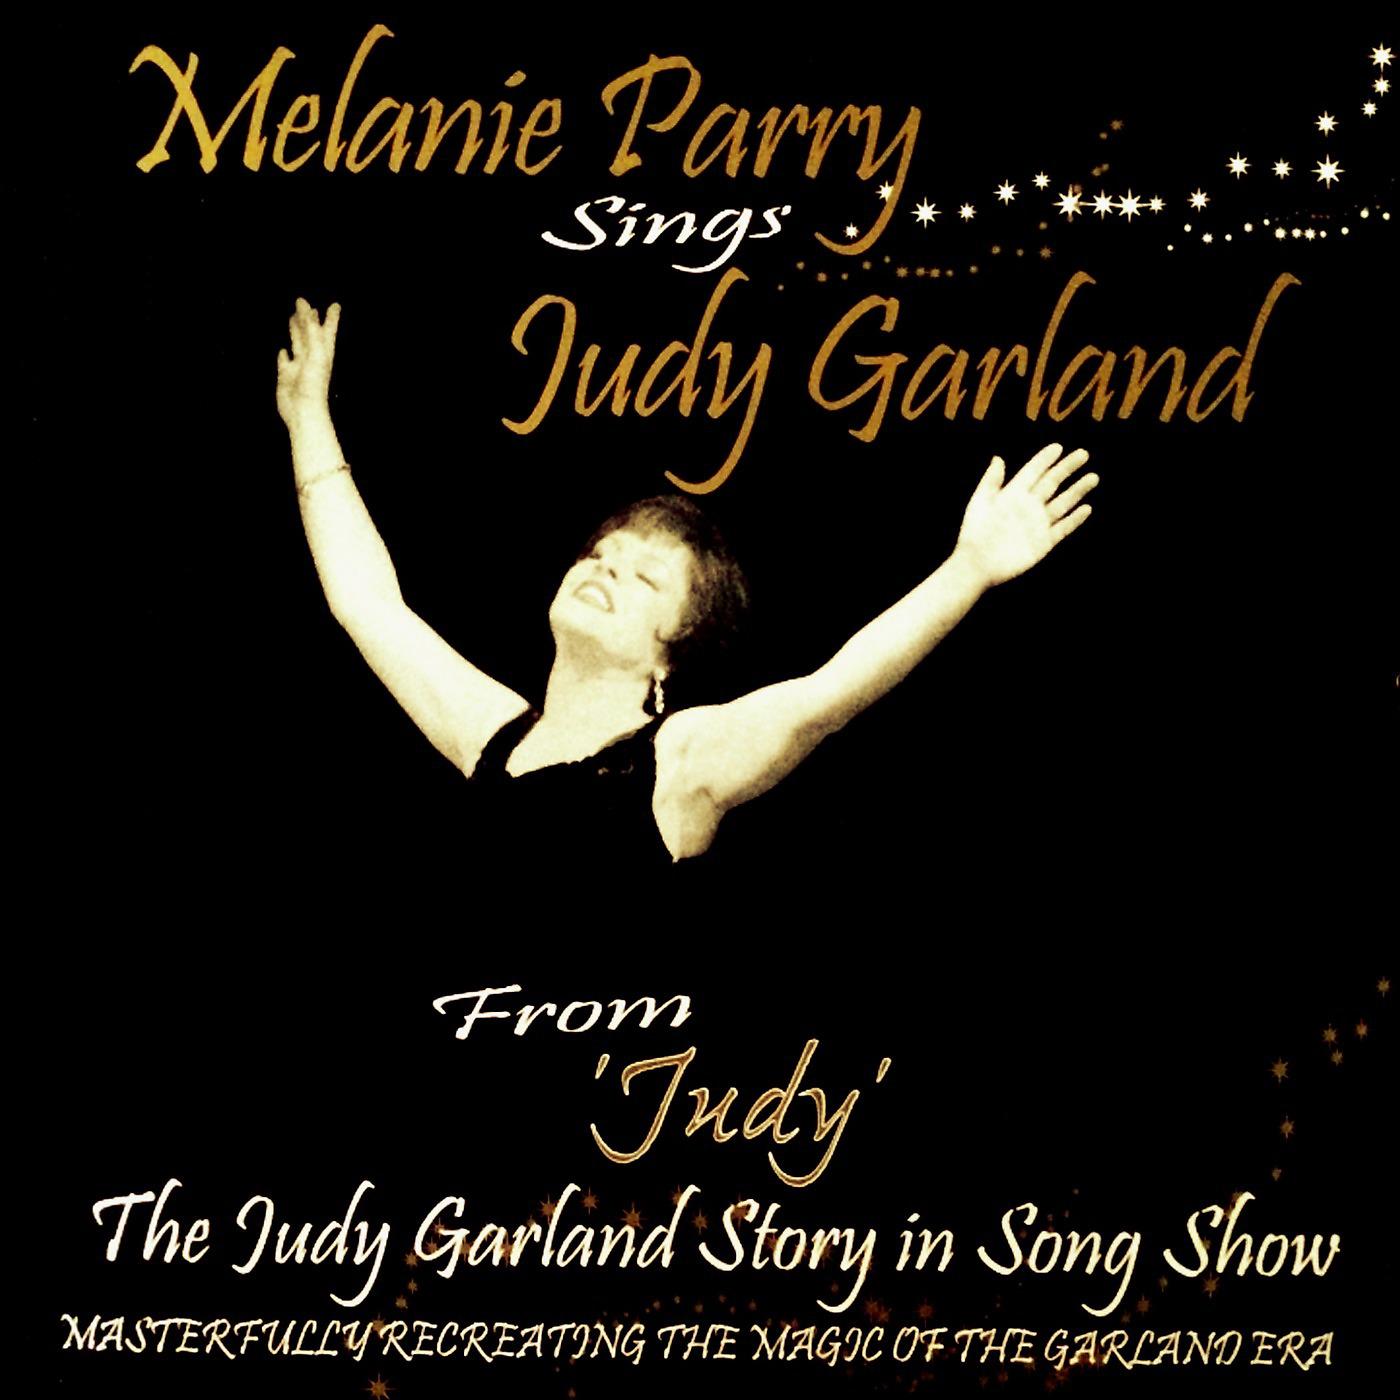 Постер альбома Melanie Parry Sings Judy Garland ("From Judy, the Judy Garland Story in Song Show")